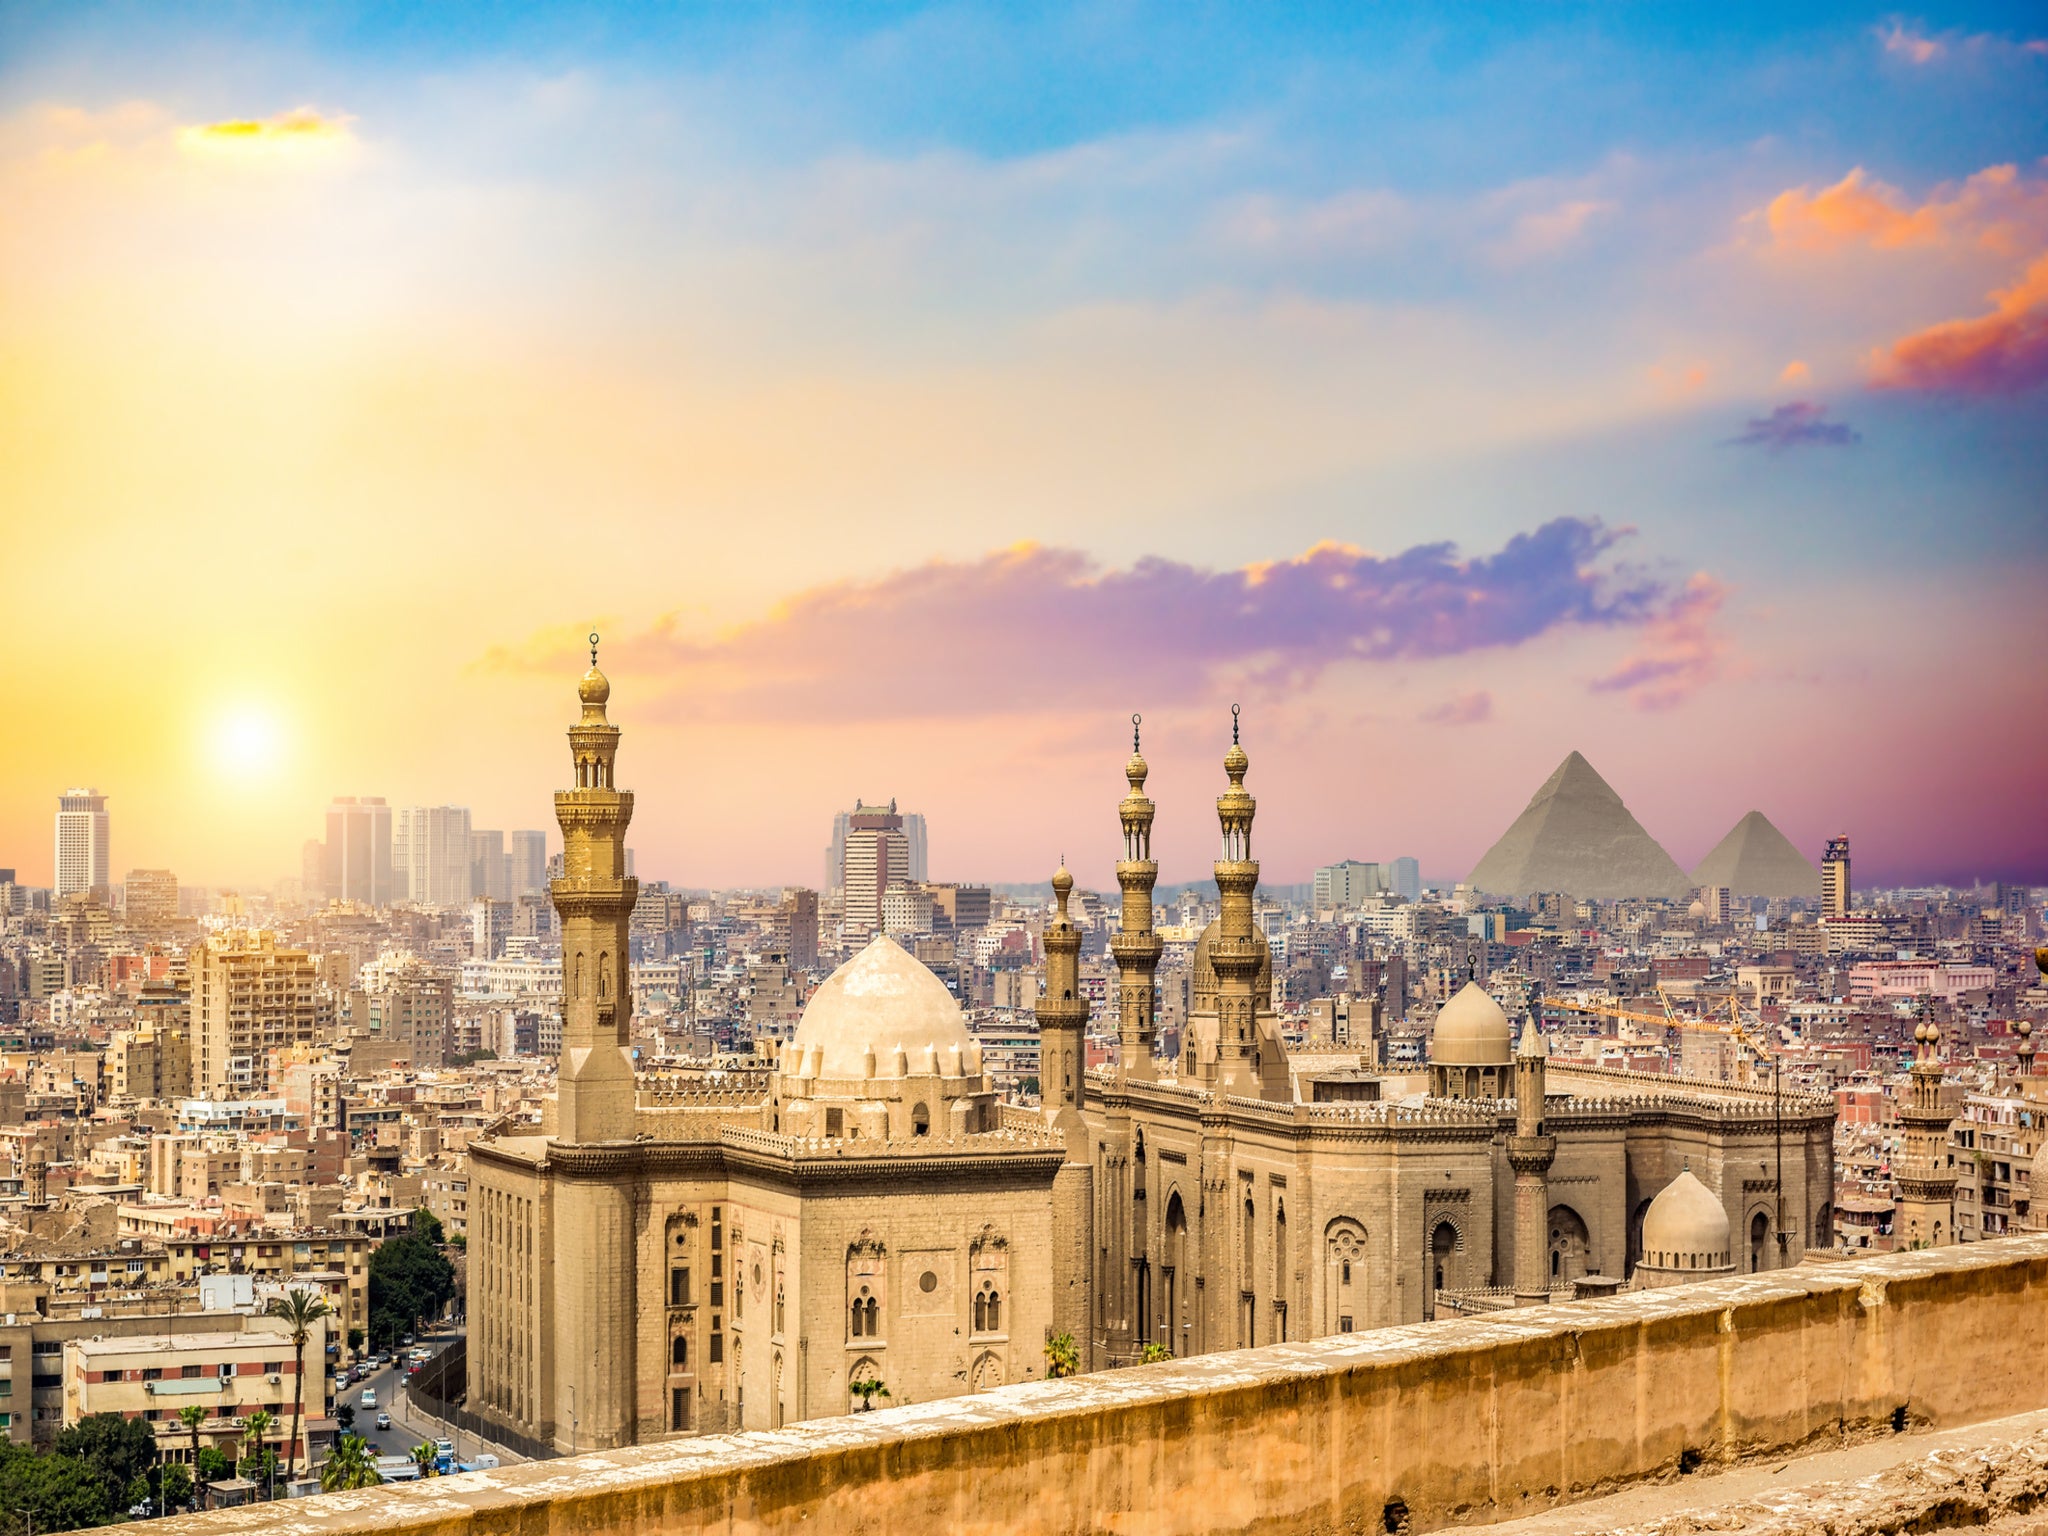 Around 14 million people come to Cairo each year, to explore mosques, museums, pyramids and more